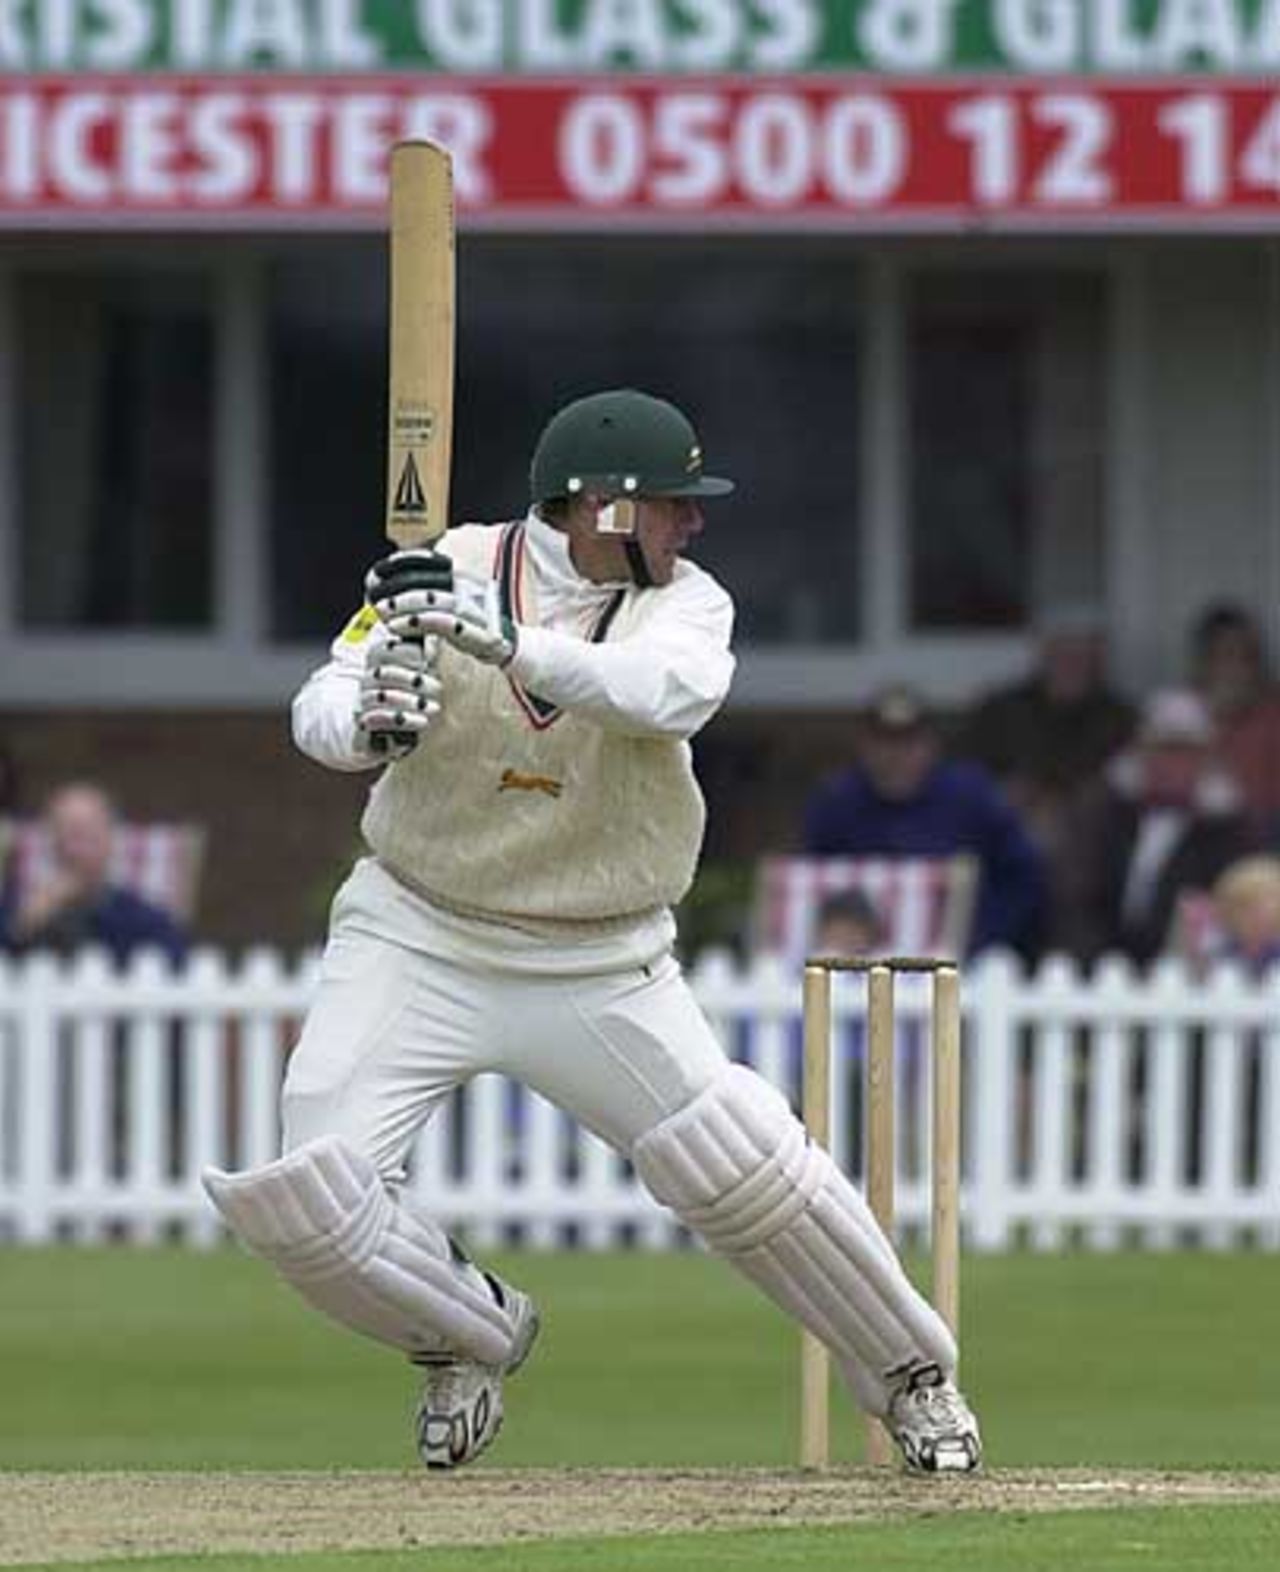 Neil Burns with a square cut in the Leics innings, Benson & Hedges Cup, May 22 at Leicester